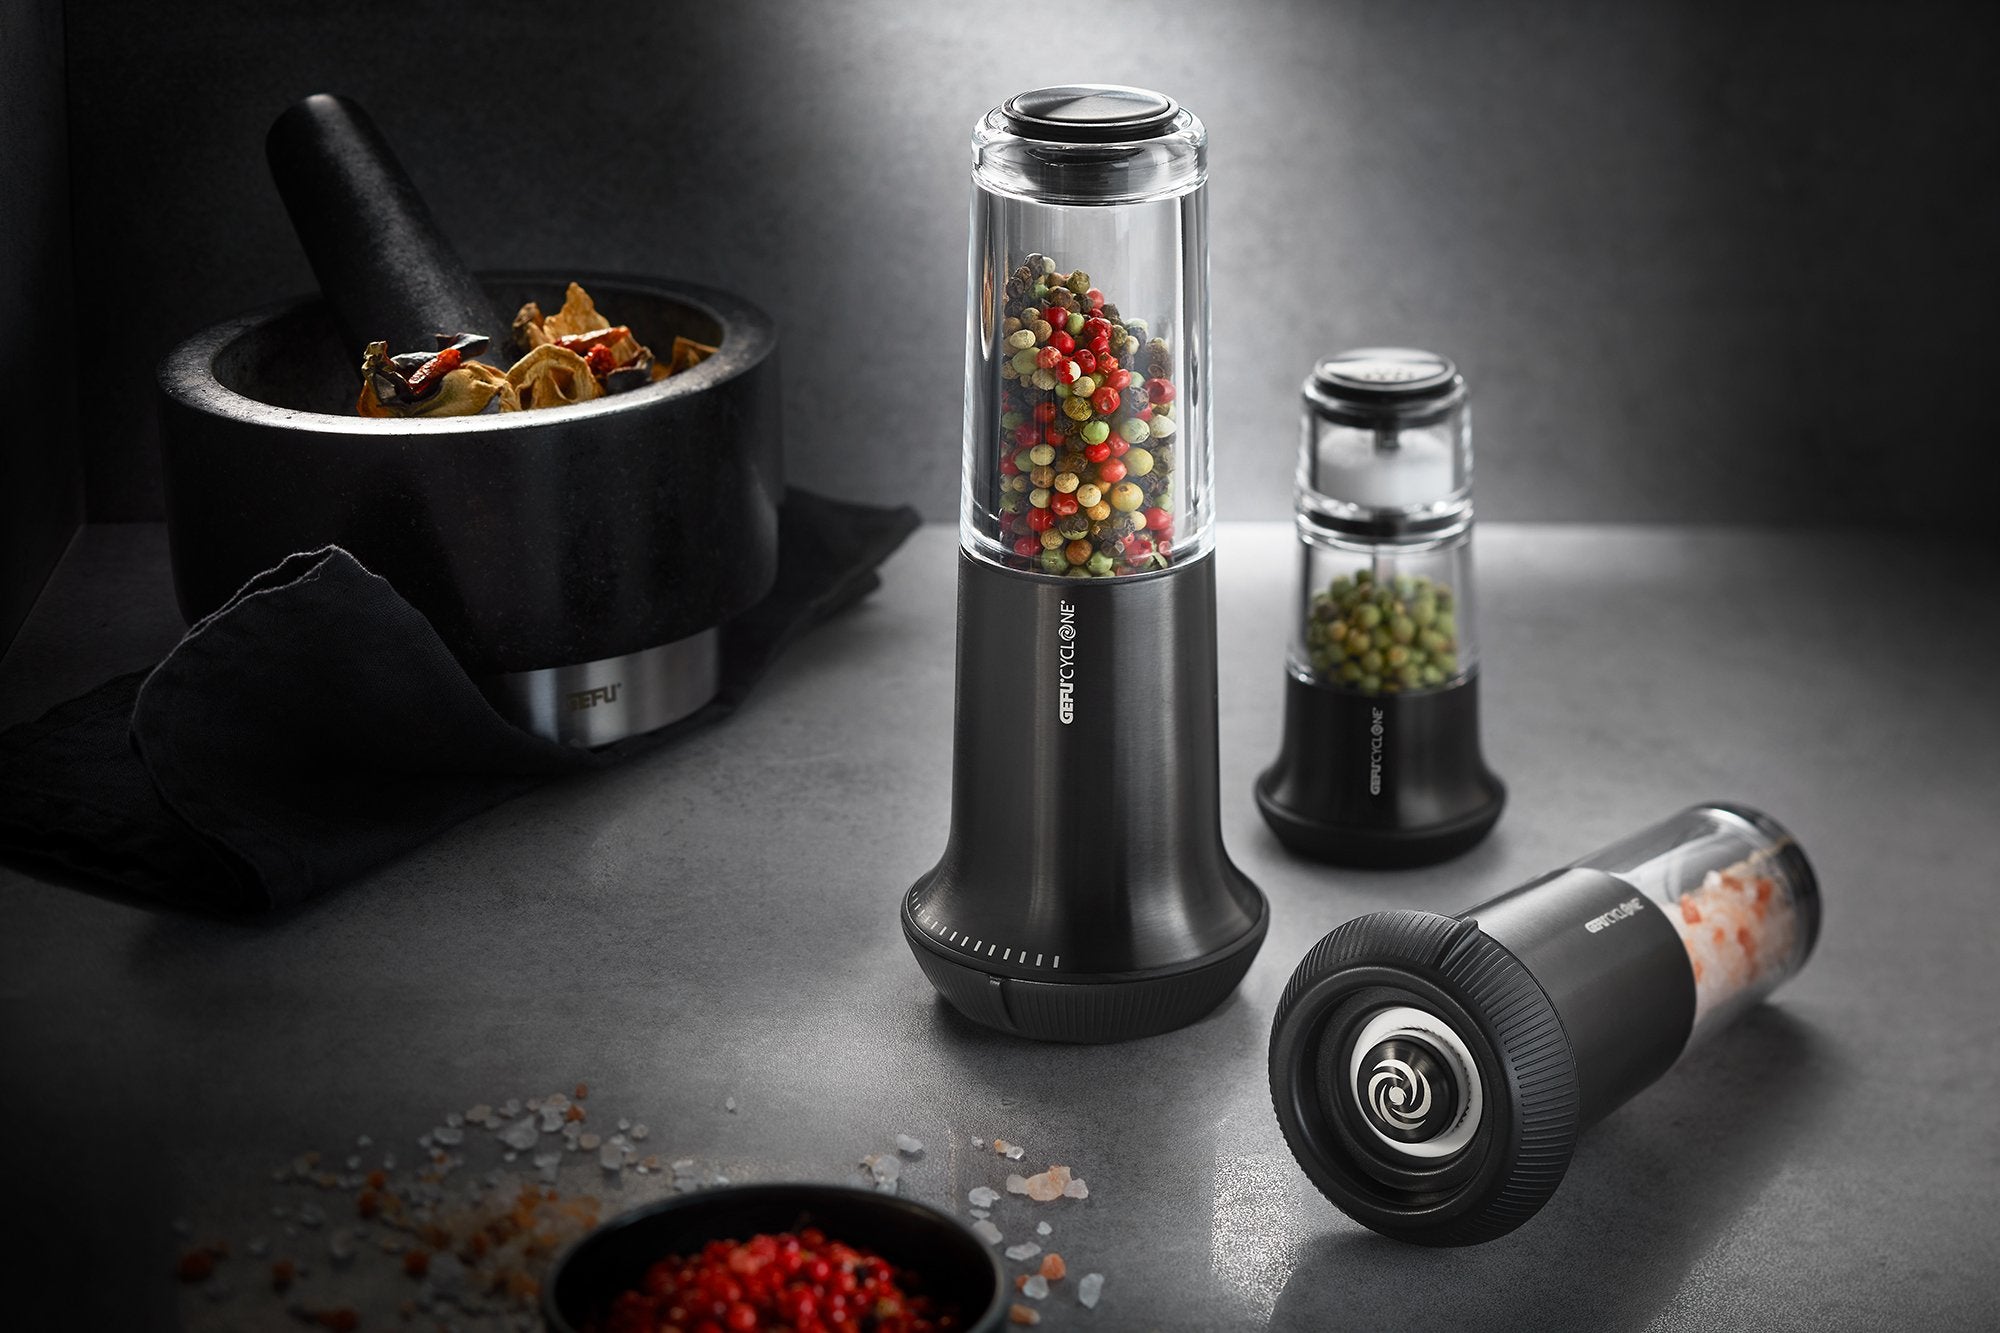 GEFU Salt Or Pepper Mill X-Plosion®, S Black - Whole and All